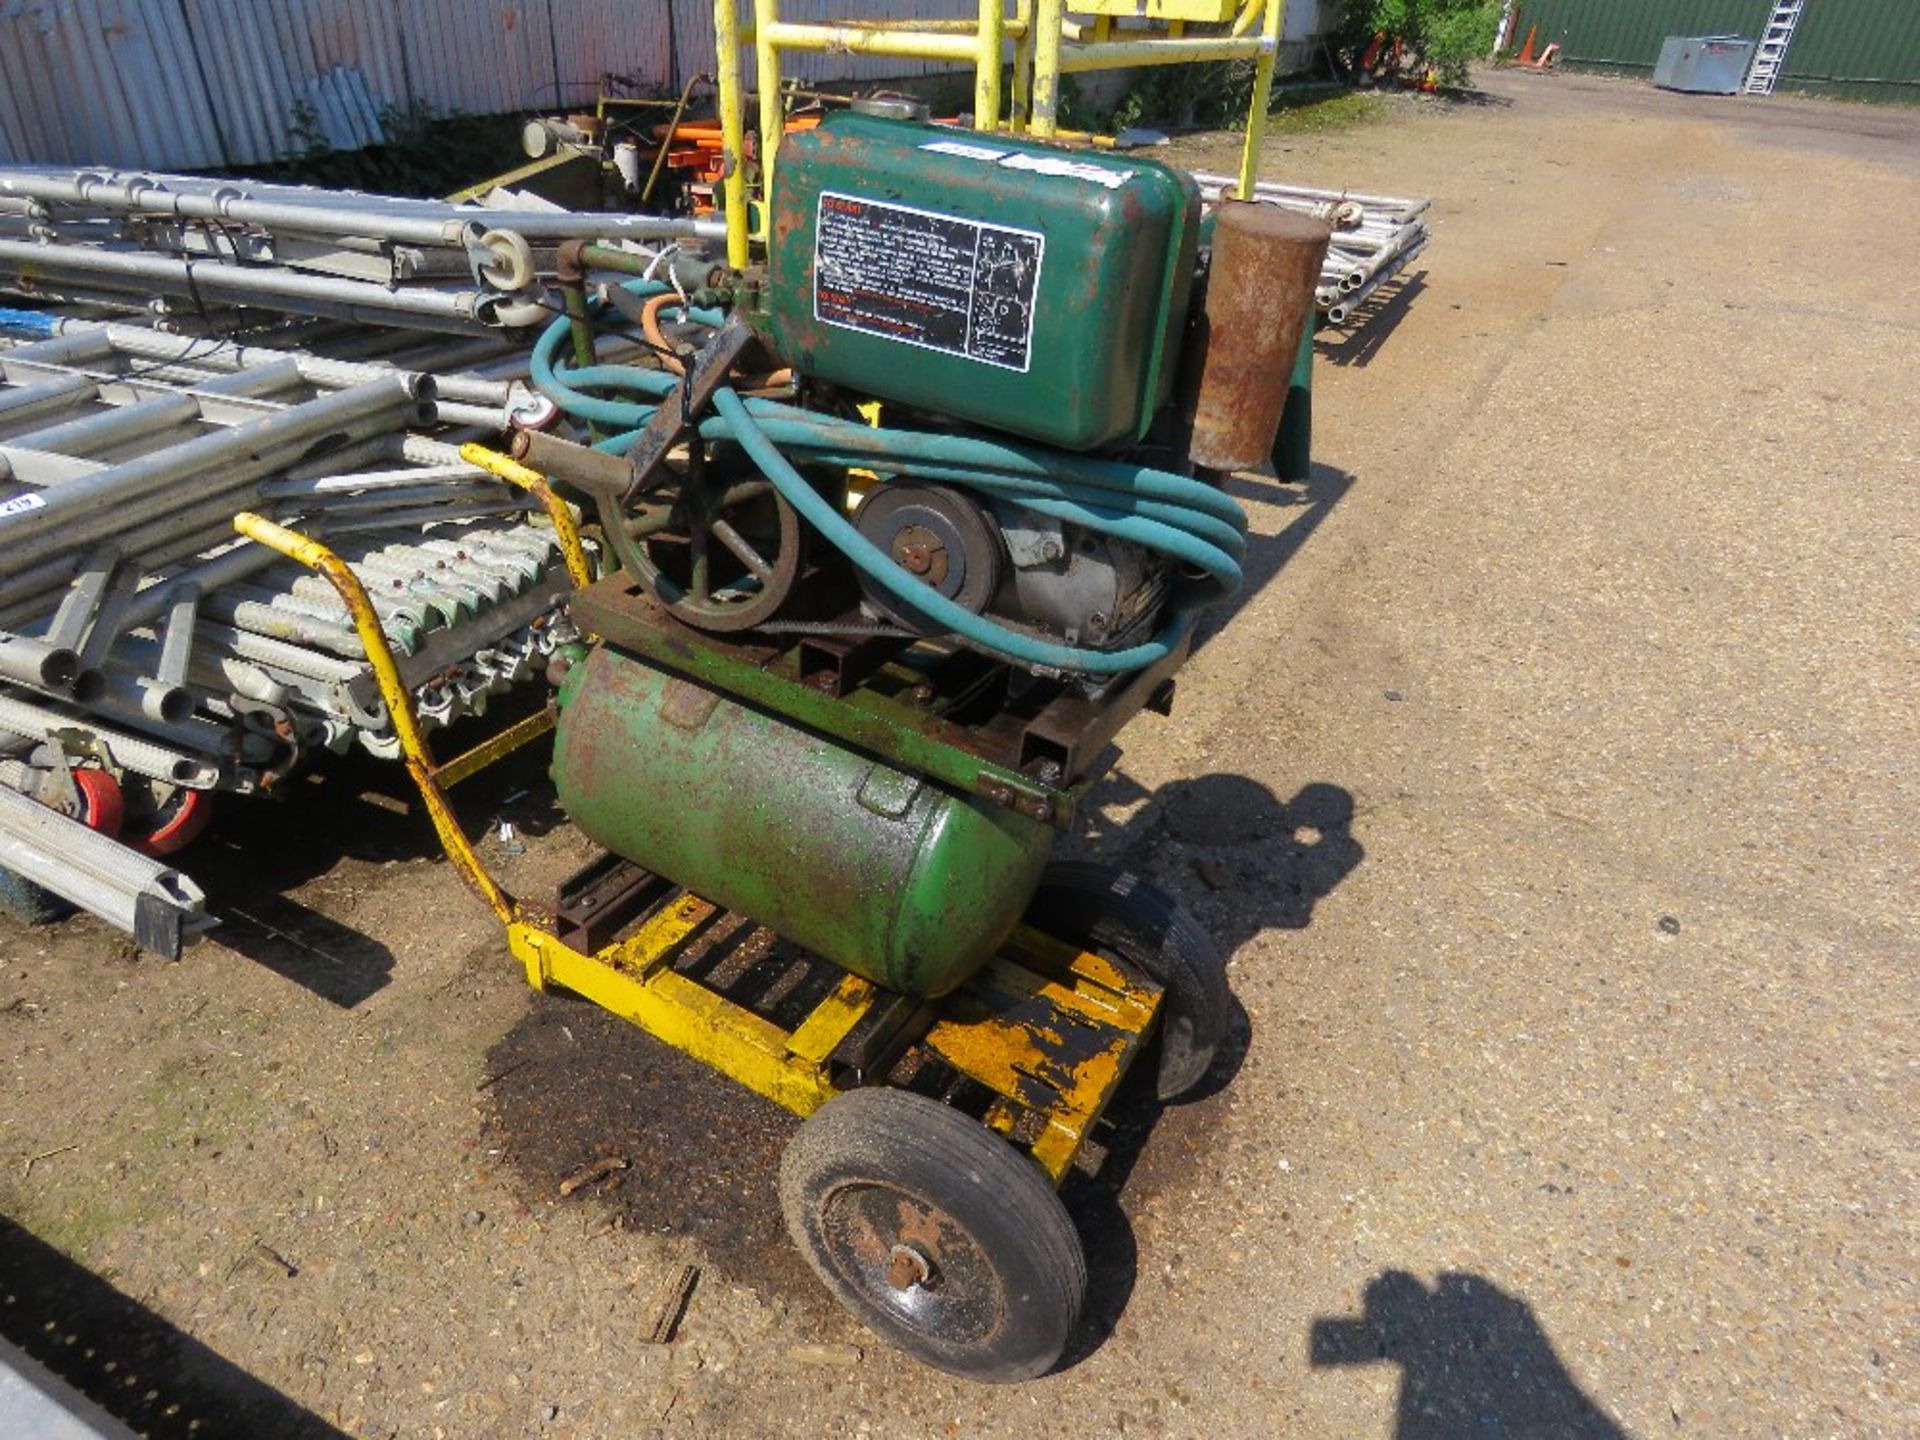 OLD DIESEL ENGINED COMPRESSOR ON WHEELS.....THIS LOT IS SOLD UNDER THE AUCTIONEERS MARGIN SCHEME, TH